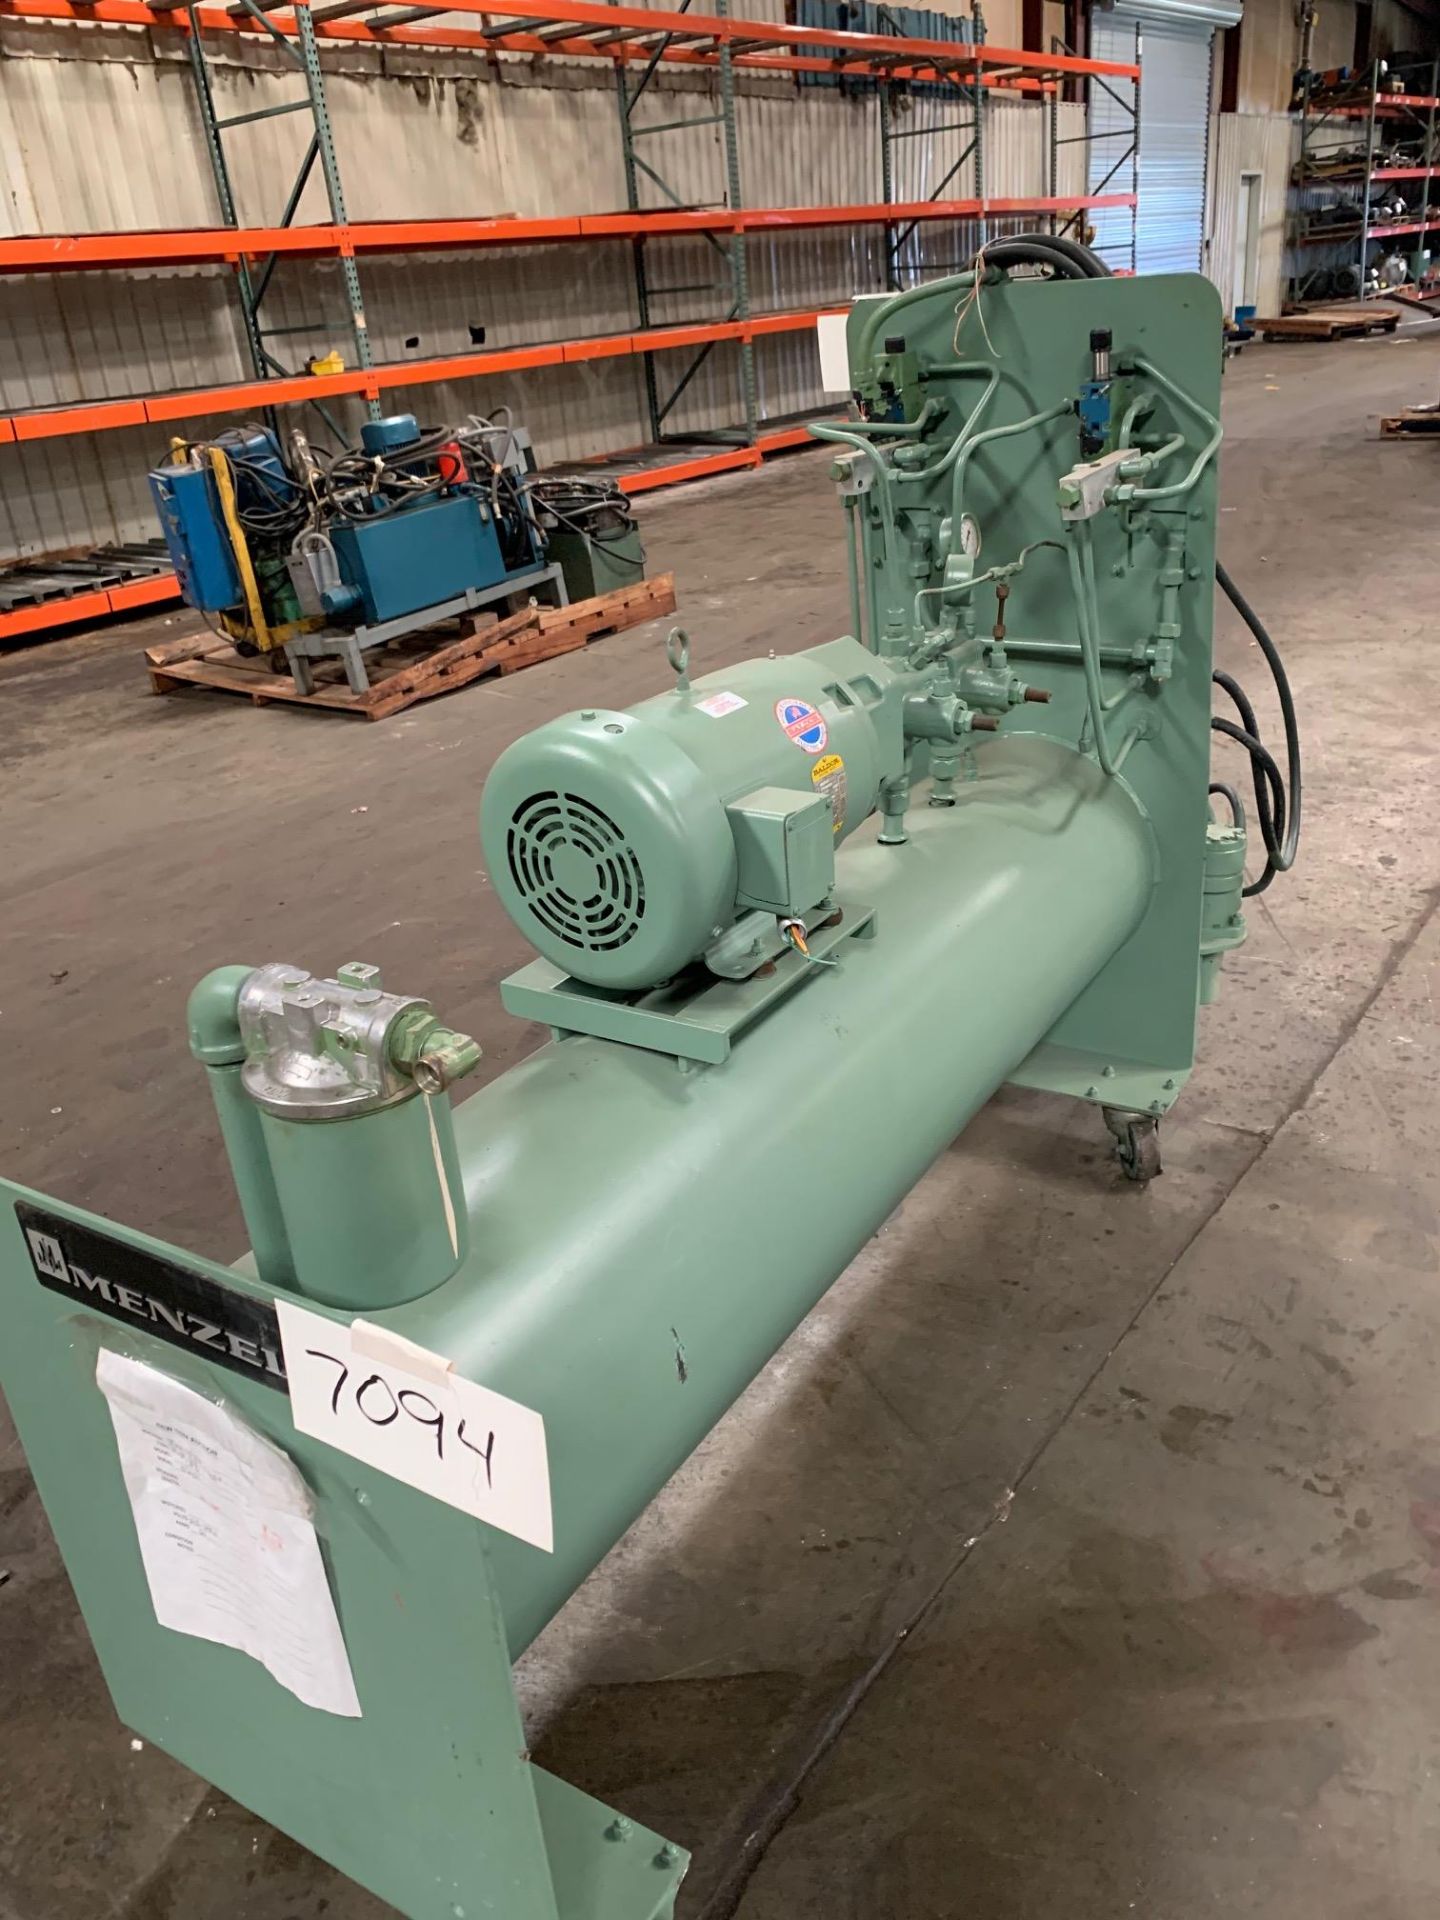 Menzel Hydraulic units double motor model STB 220/460 Volts Serial 02451 , Rigging Fee: $25 - Image 2 of 7